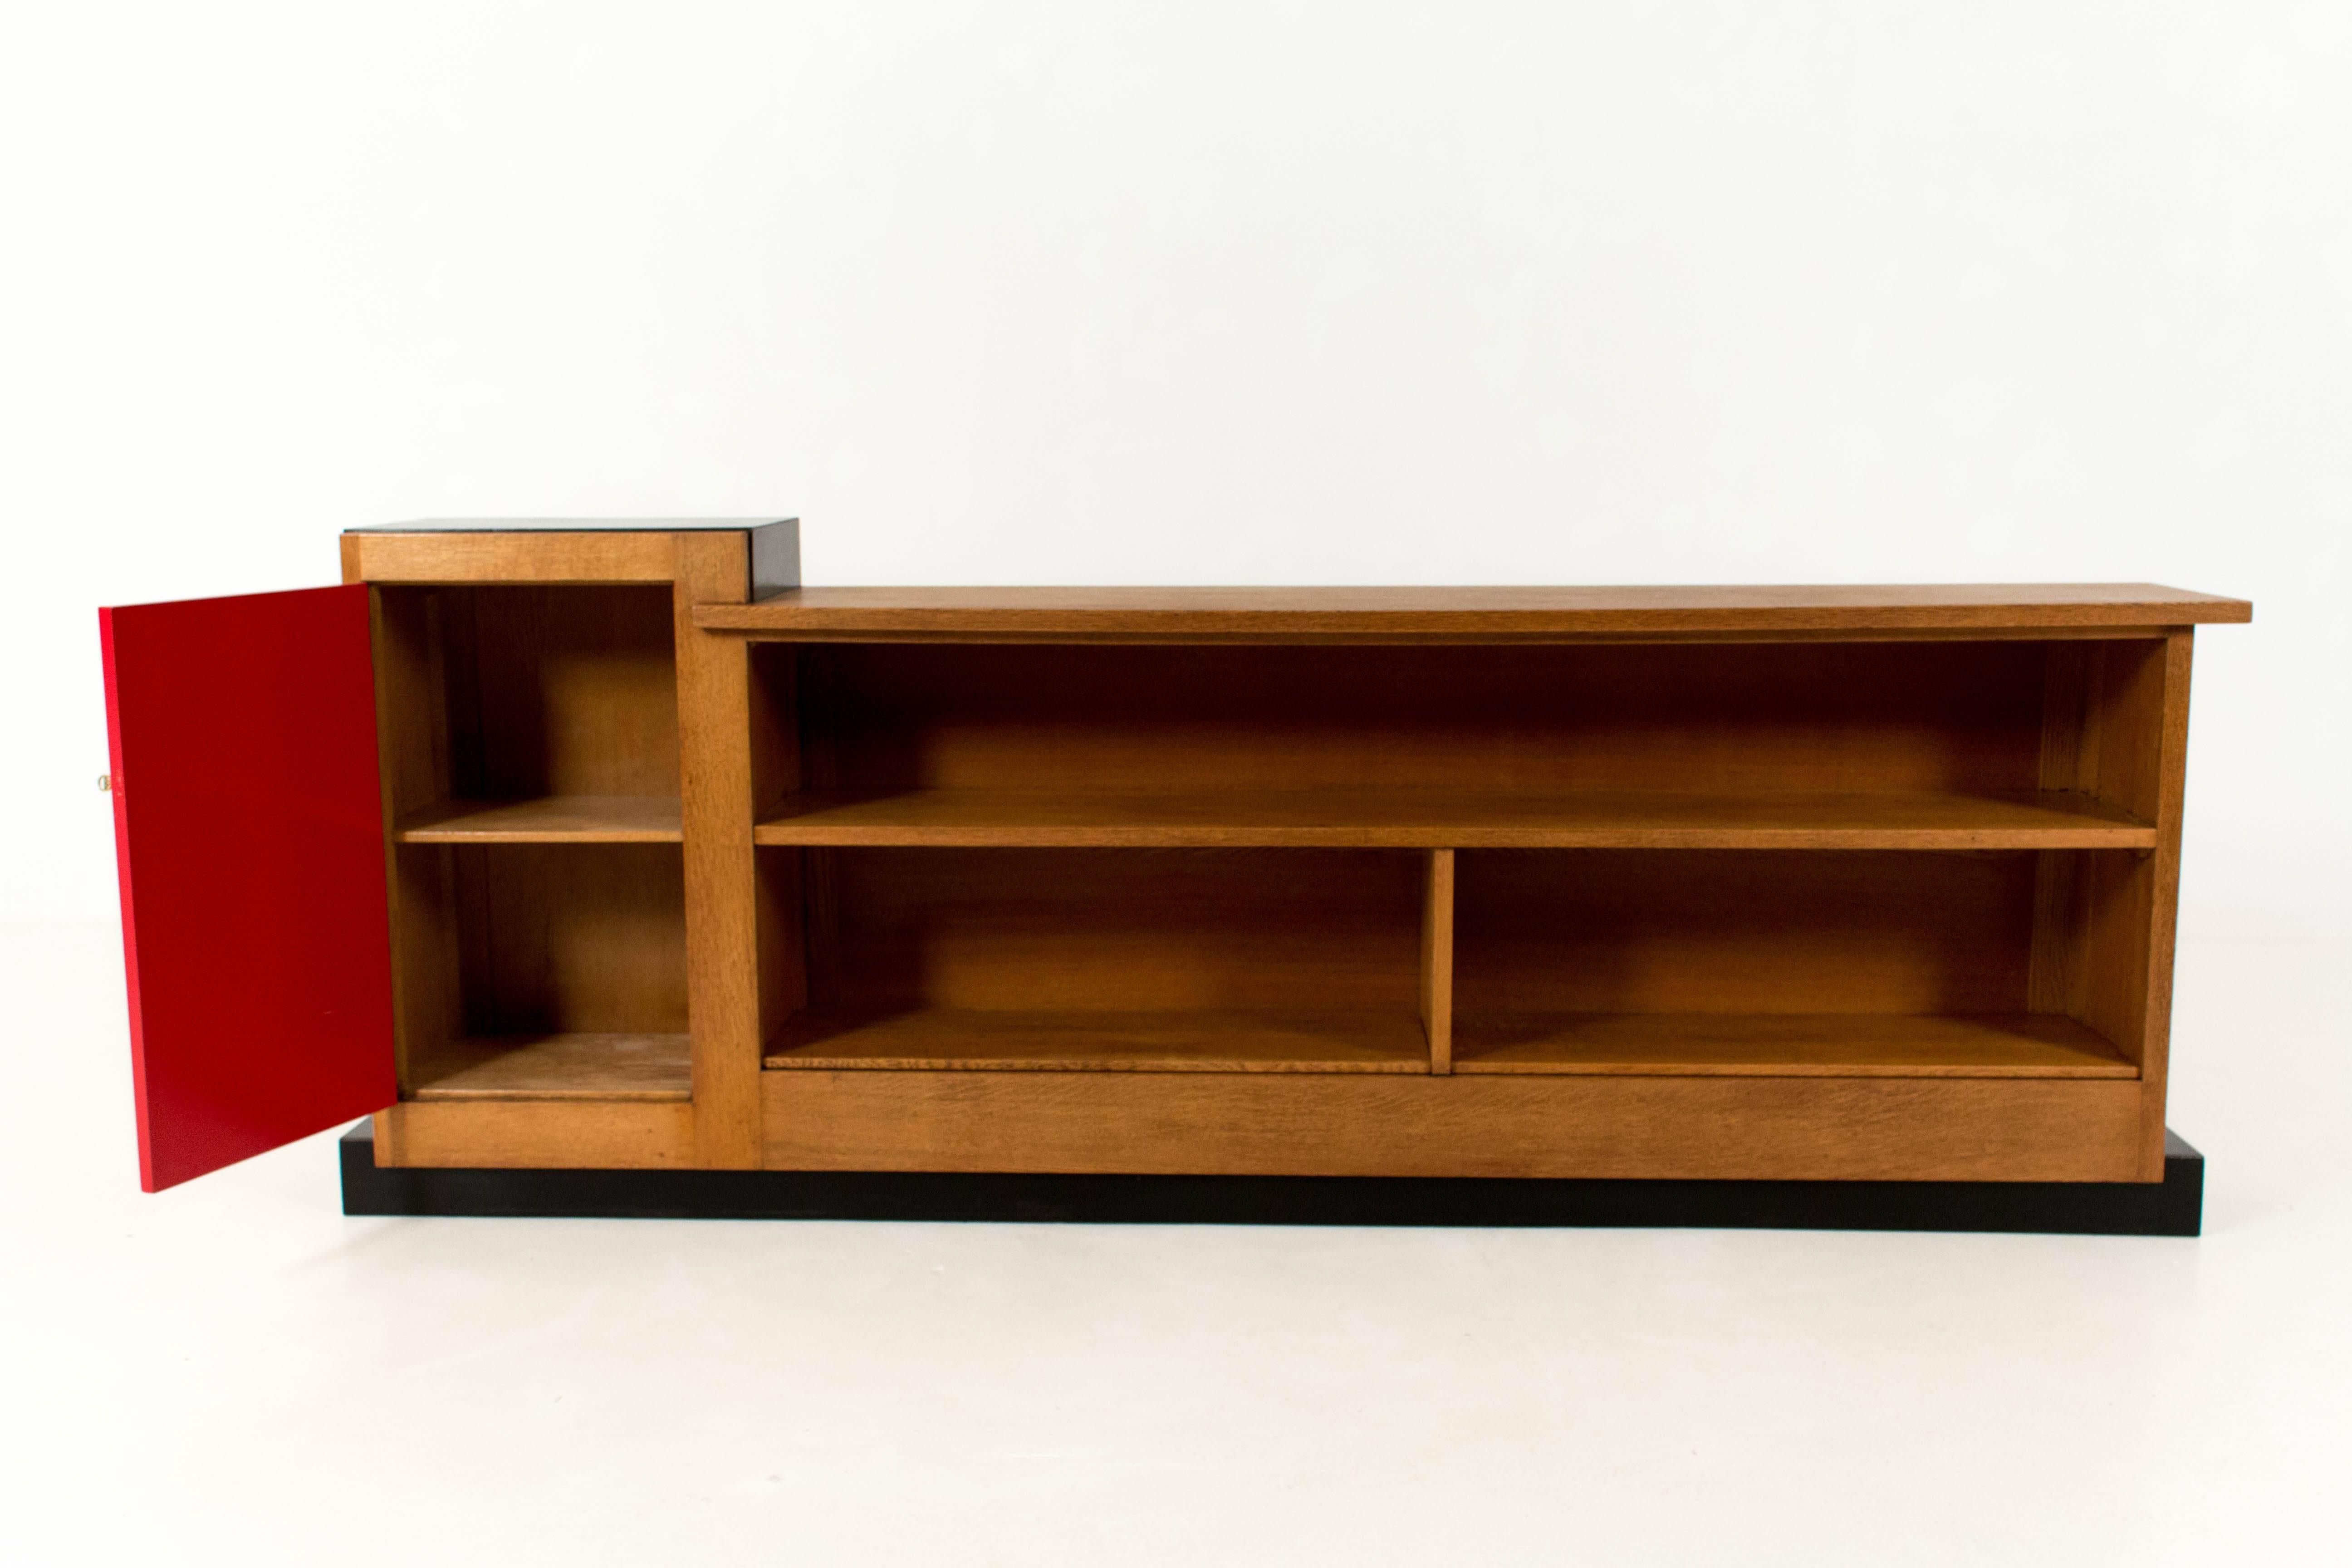 Lacquered Important and Rare Art Deco Haagse School Sideboard by Henk Wouda for Pander